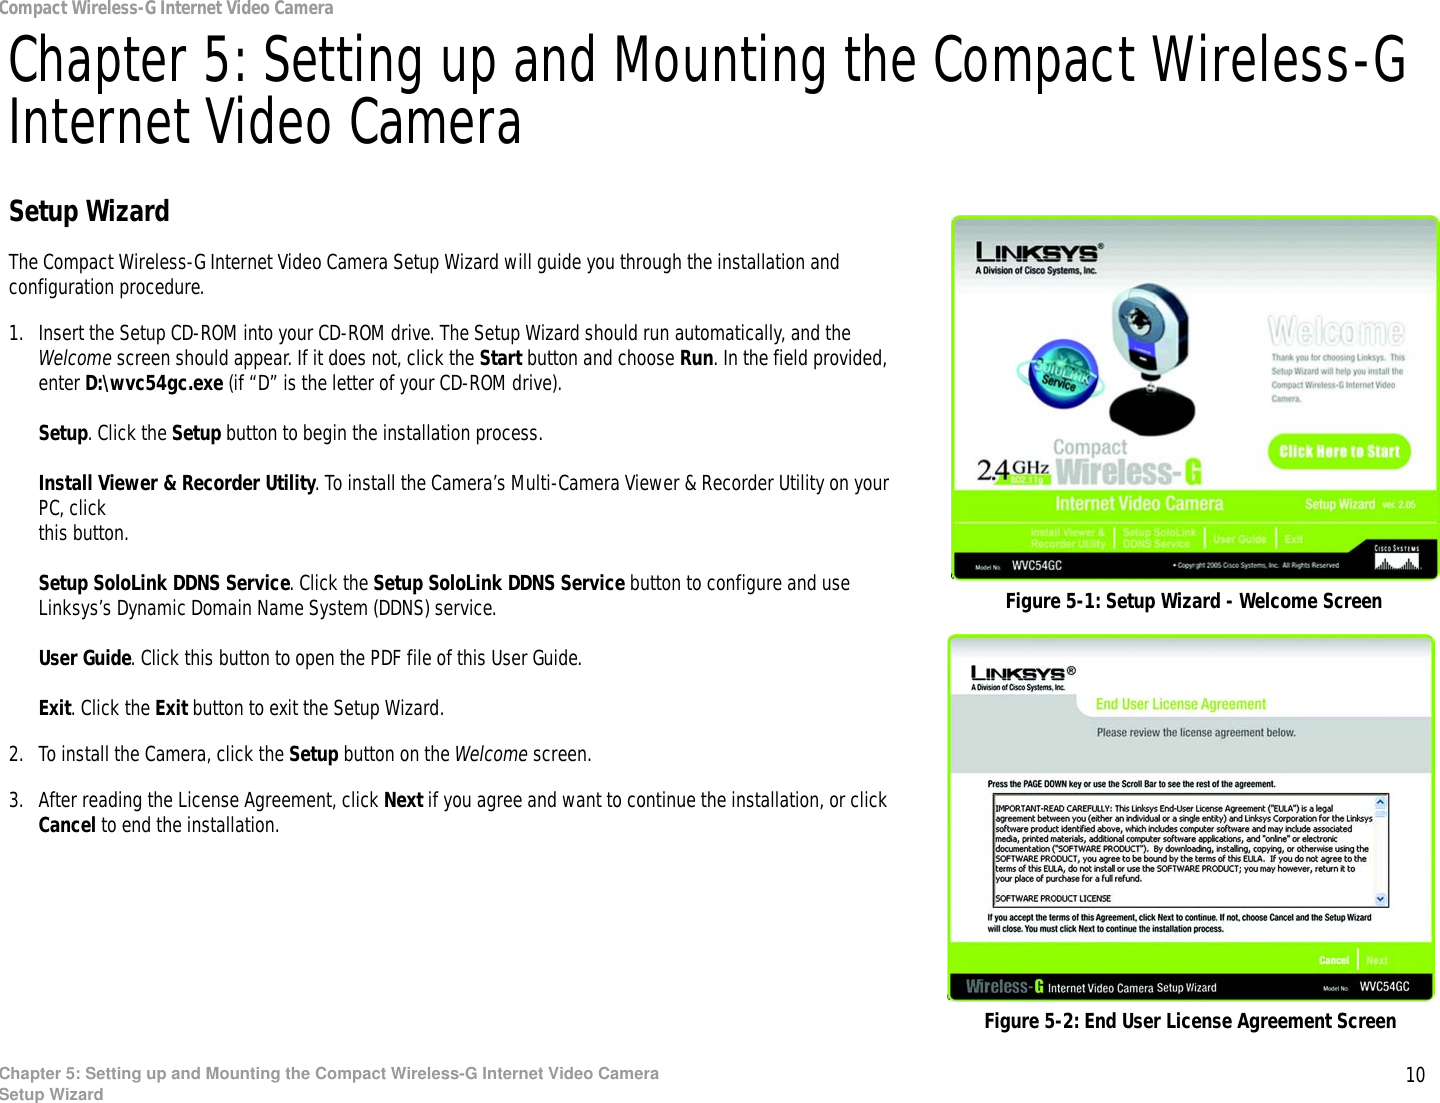 10Chapter 5: Setting up and Mounting the Compact Wireless-G Internet Video CameraSetup WizardCompact Wireless-G Internet Video CameraChapter 5: Setting up and Mounting the Compact Wireless-G Internet Video CameraSetup WizardThe Compact Wireless-G Internet Video Camera Setup Wizard will guide you through the installation and configuration procedure.1. Insert the Setup CD-ROM into your CD-ROM drive. The Setup Wizard should run automatically, and the Welcome screen should appear. If it does not, click the Start button and choose Run. In the field provided, enter D:\wvc54gc.exe (if “D” is the letter of your CD-ROM drive).Setup. Click the Setup button to begin the installation process.Install Viewer &amp; Recorder Utility. To install the Camera’s Multi-Camera Viewer &amp; Recorder Utility on your PC, click this button.Setup SoloLink DDNS Service. Click the Setup SoloLink DDNS Service button to configure and use Linksys’s Dynamic Domain Name System (DDNS) service.User Guide. Click this button to open the PDF file of this User Guide.Exit. Click the Exit button to exit the Setup Wizard.2. To install the Camera, click the Setup button on the Welcome screen.3. After reading the License Agreement, click Next if you agree and want to continue the installation, or click Cancel to end the installation.Figure 5-2: End User License Agreement ScreenFigure 5-1: Setup Wizard - Welcome Screen